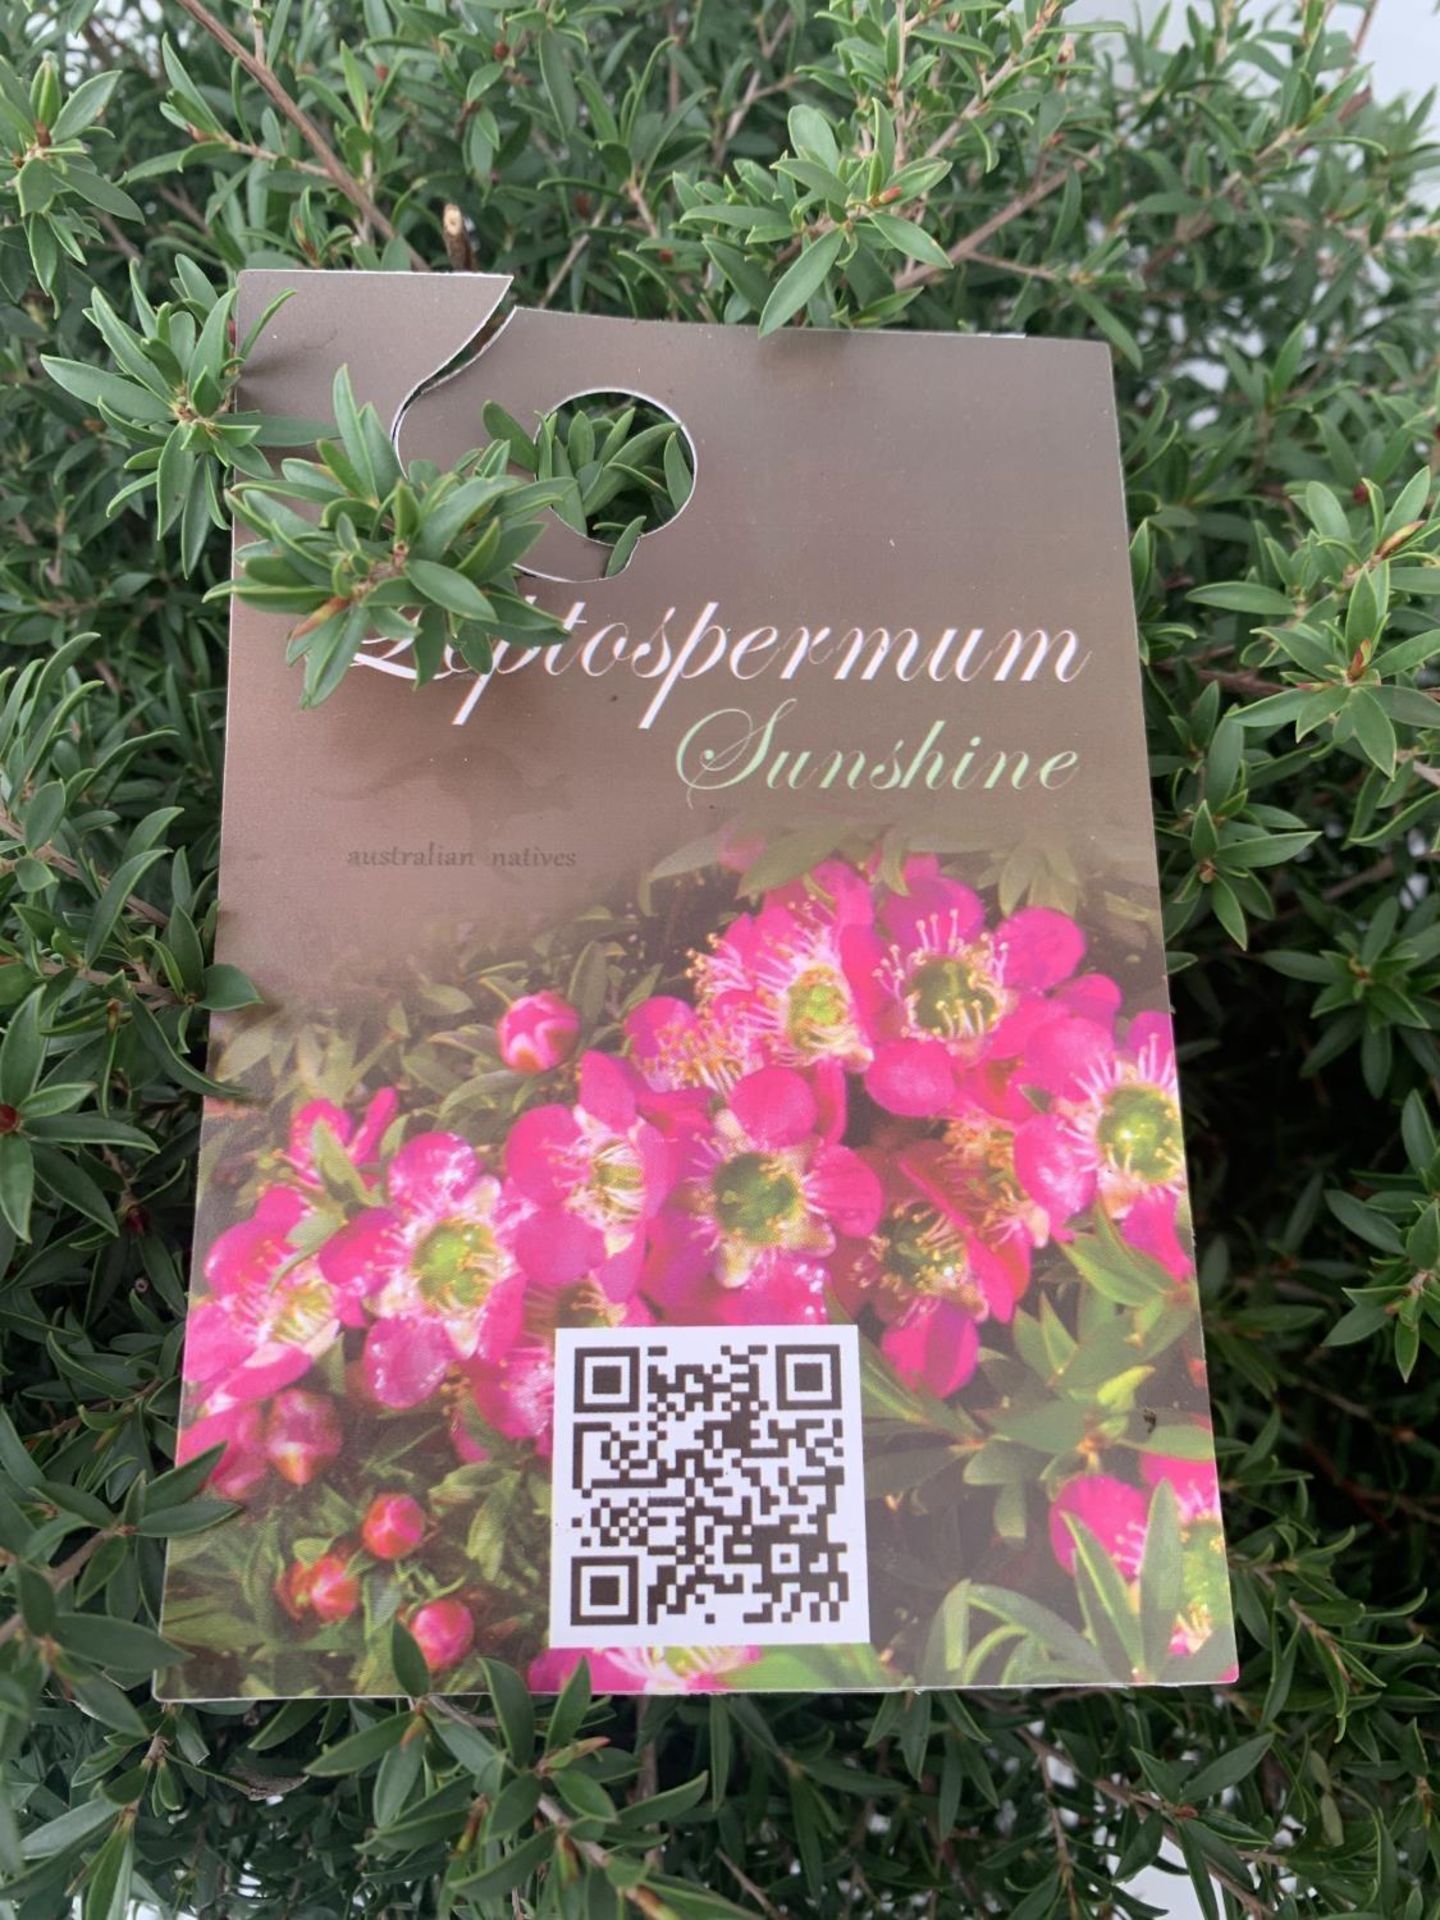 TWO LEPTOSPERMUM 'SUNSHINE' PINK SHRUBS APPROX 60CM IN HEIGHT IN FIVE LTR POTS PLUS VAT TO BE SOLD - Image 8 of 8